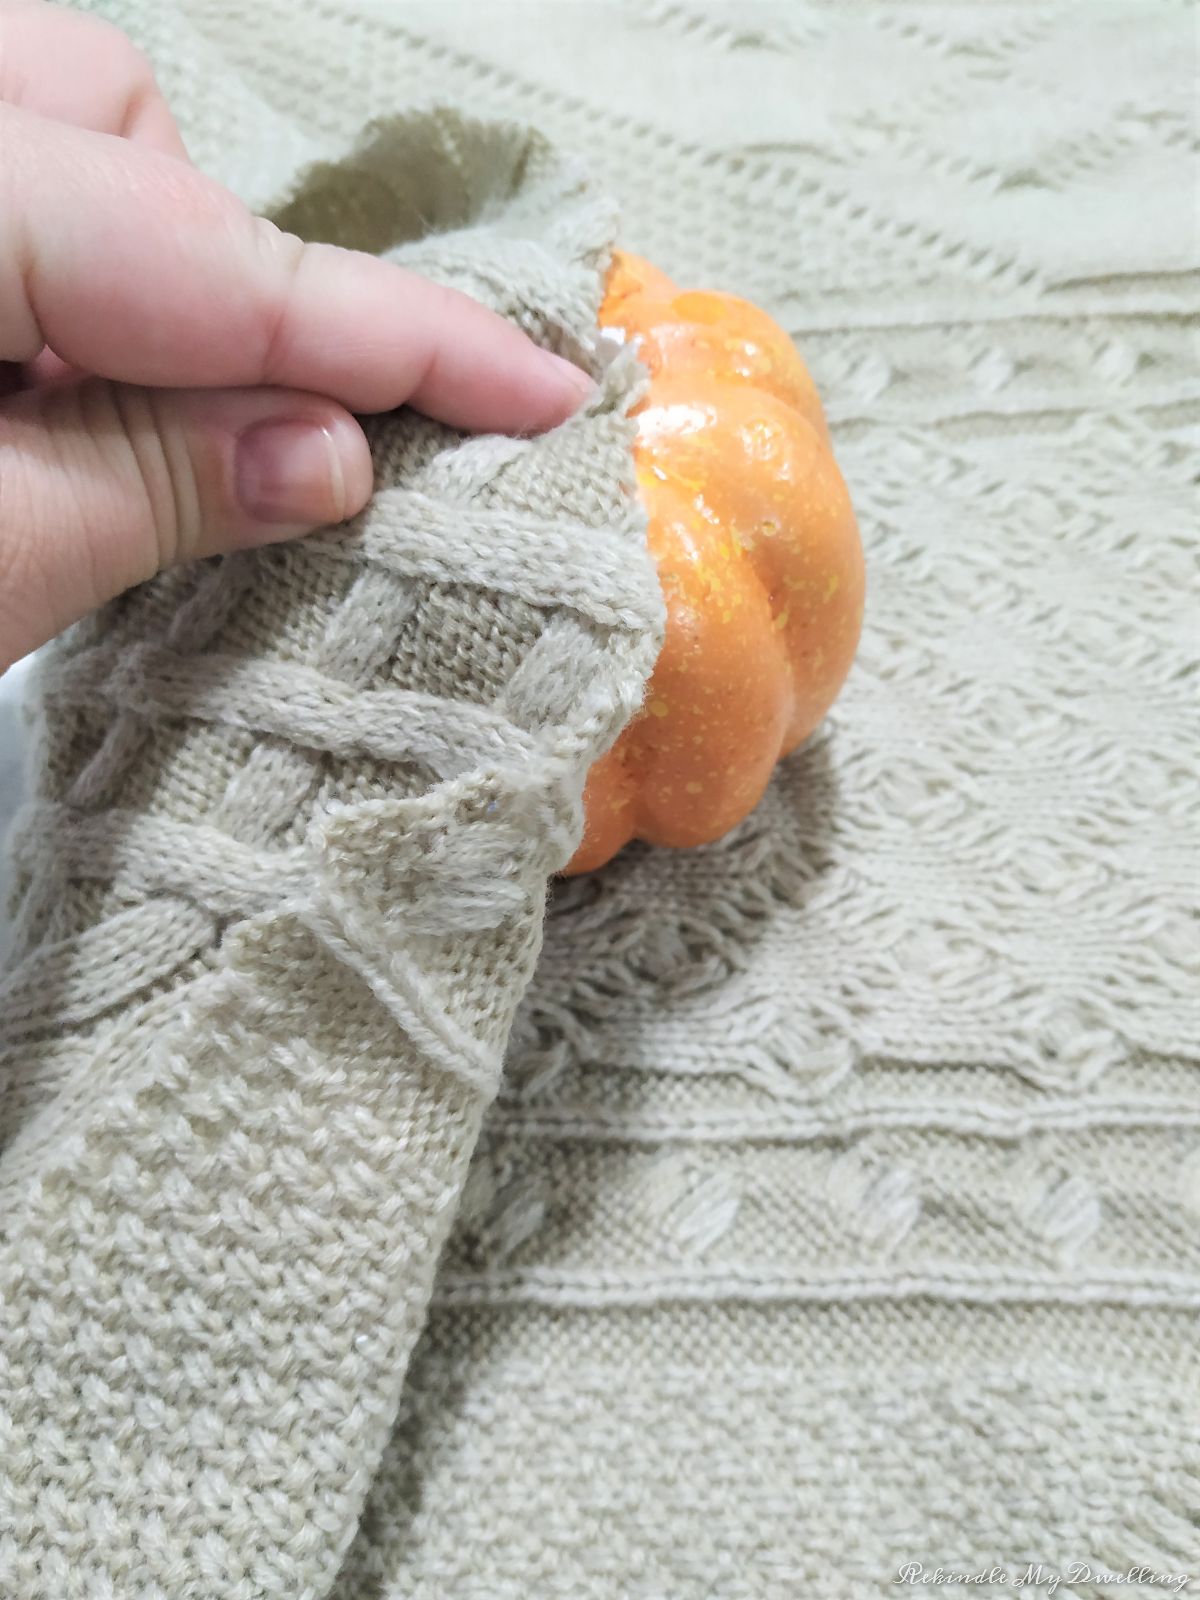 Pushing the sweater into the top of the foam pumpkin.